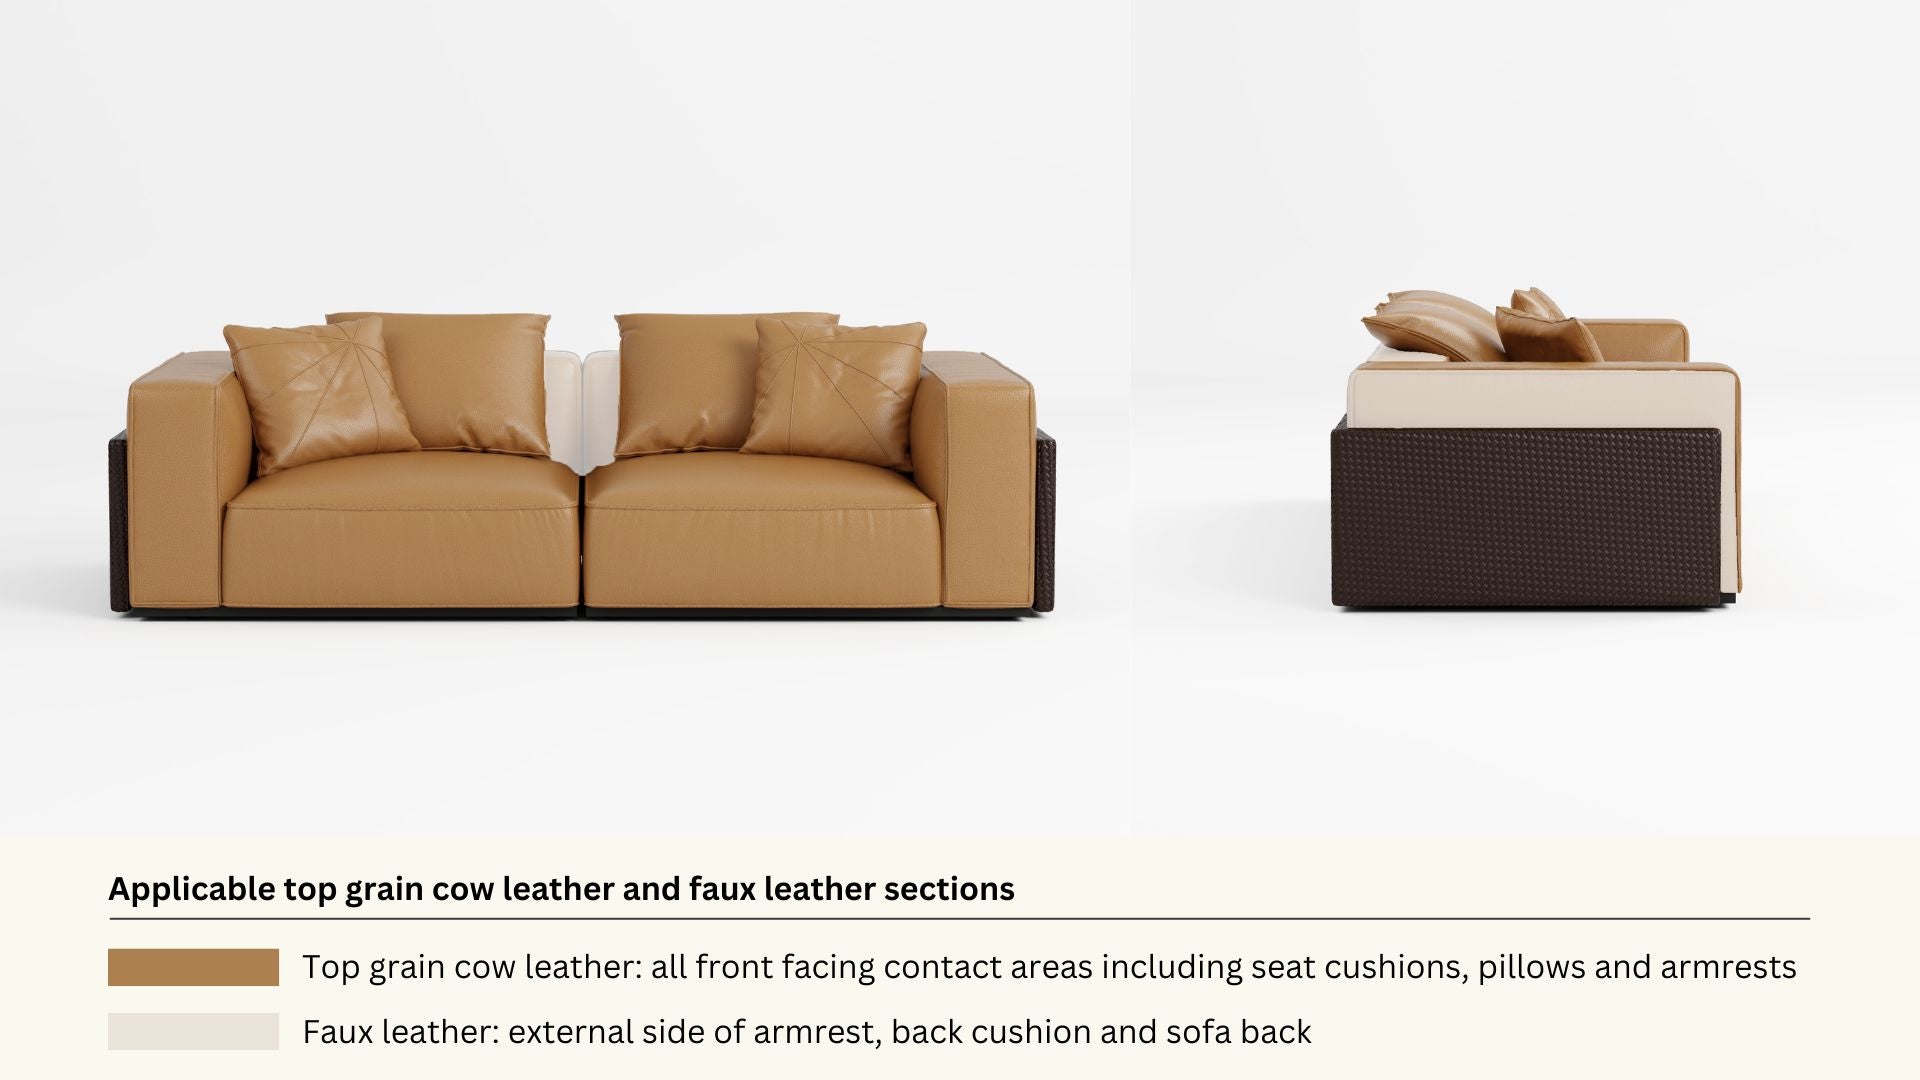 Faux leather and real leather components within a half leather sofa